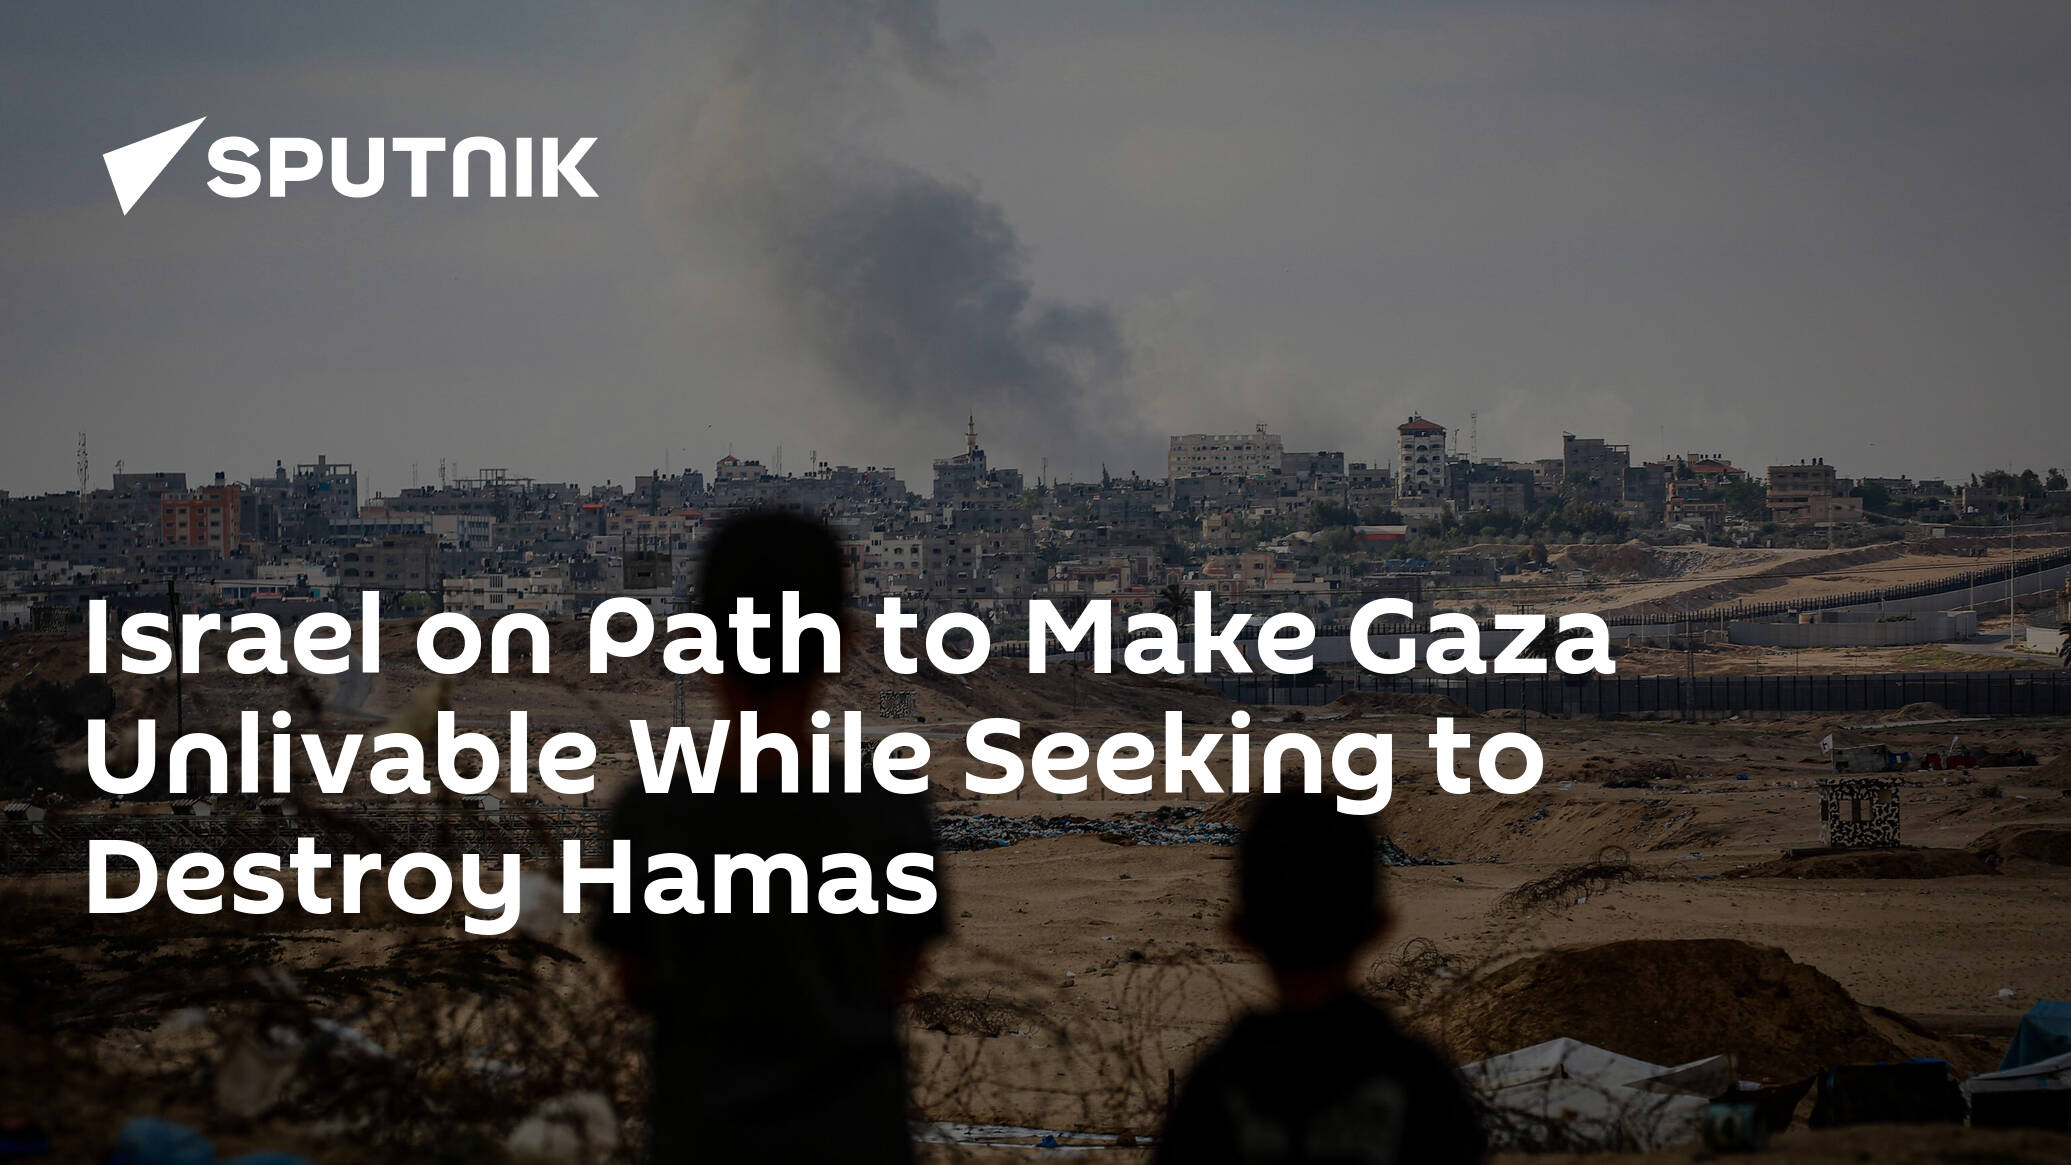 Israel on Path to Make Gaza Unlivable While Seeking to Destroy Hamas